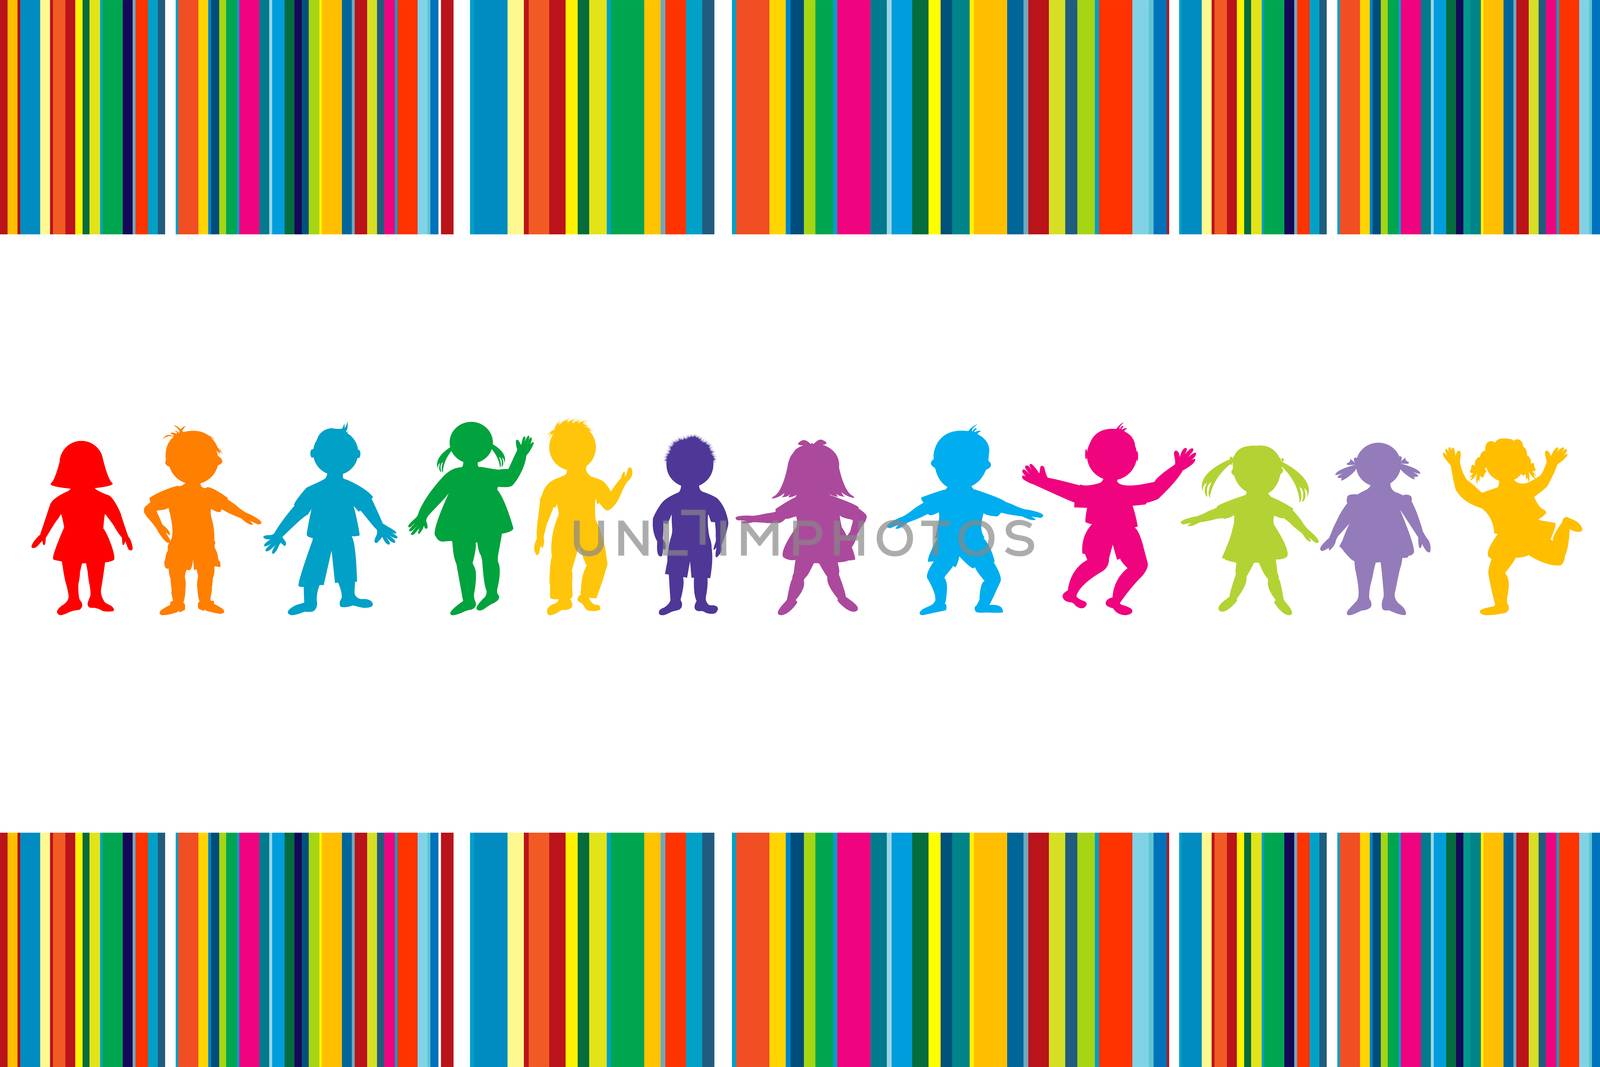 Cartoon colored children on stripped background by hibrida13